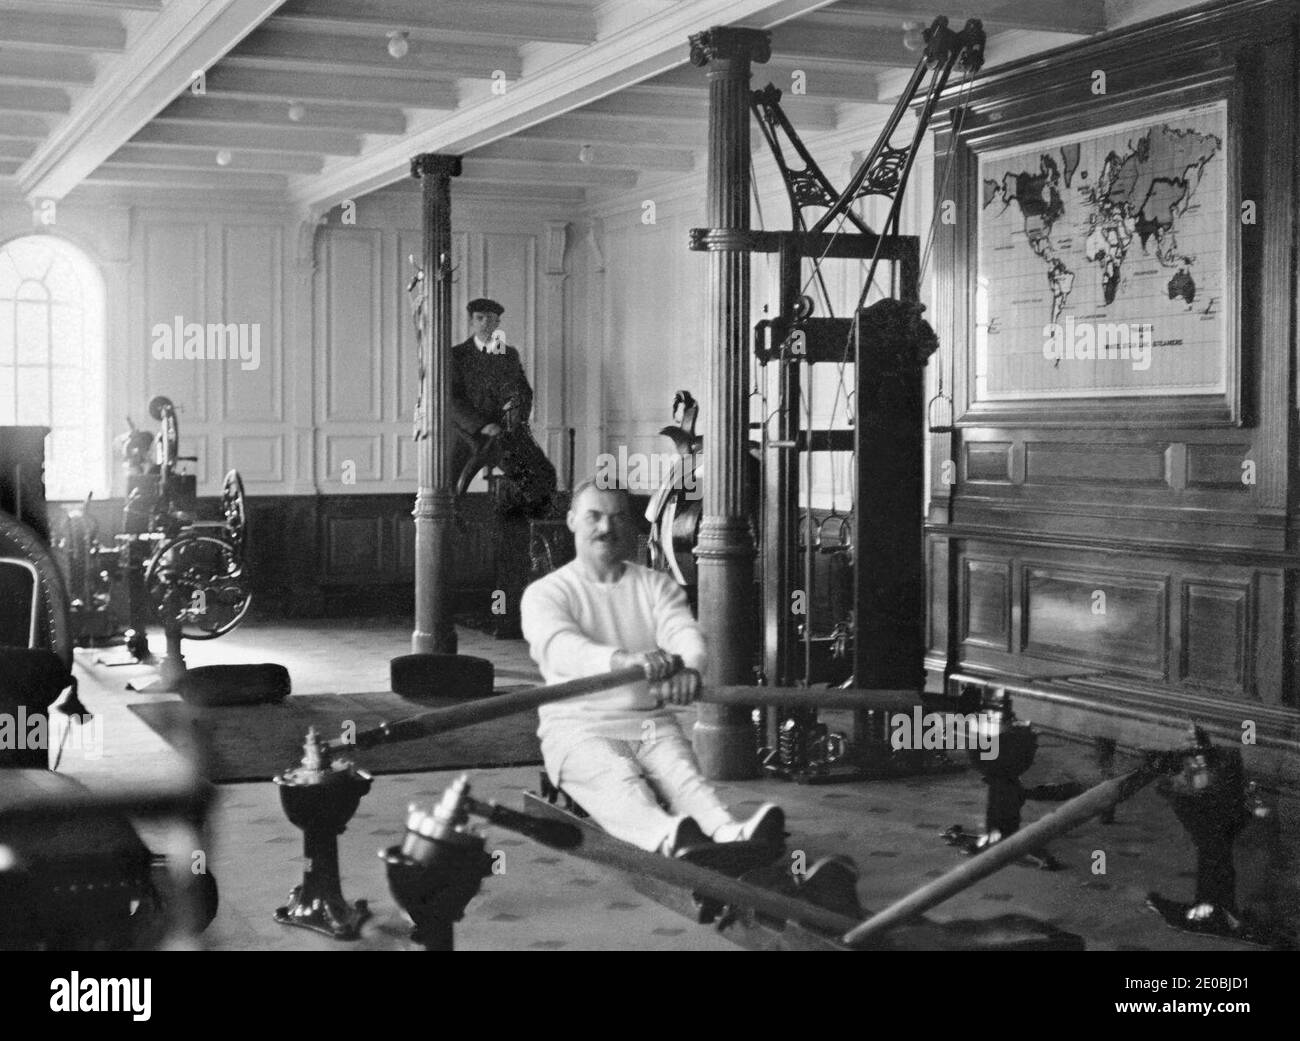 A photograph of TW McCawley, physical educator on a rowing machine and Harland & Wolffe, electrician William Parr on a mechanical camel in the Gymnasium of the RMS Titanic on display at 'Titanic, Return to Cherbourg' exhibition, at Cite de la Mer Museum in Cherbourg, western France in March 2012. The exhibition marking the 100th anniversary of the sinking of Titanic on April 14, 1912 is to open in April 2012.Titanic was built by Harland & Wolff in Belfast Ireland during 1910-1911 and later sank on April 15th, 1912 off the coast of New Foundland after striking an iceberg during her maiden voyag Stock Photo